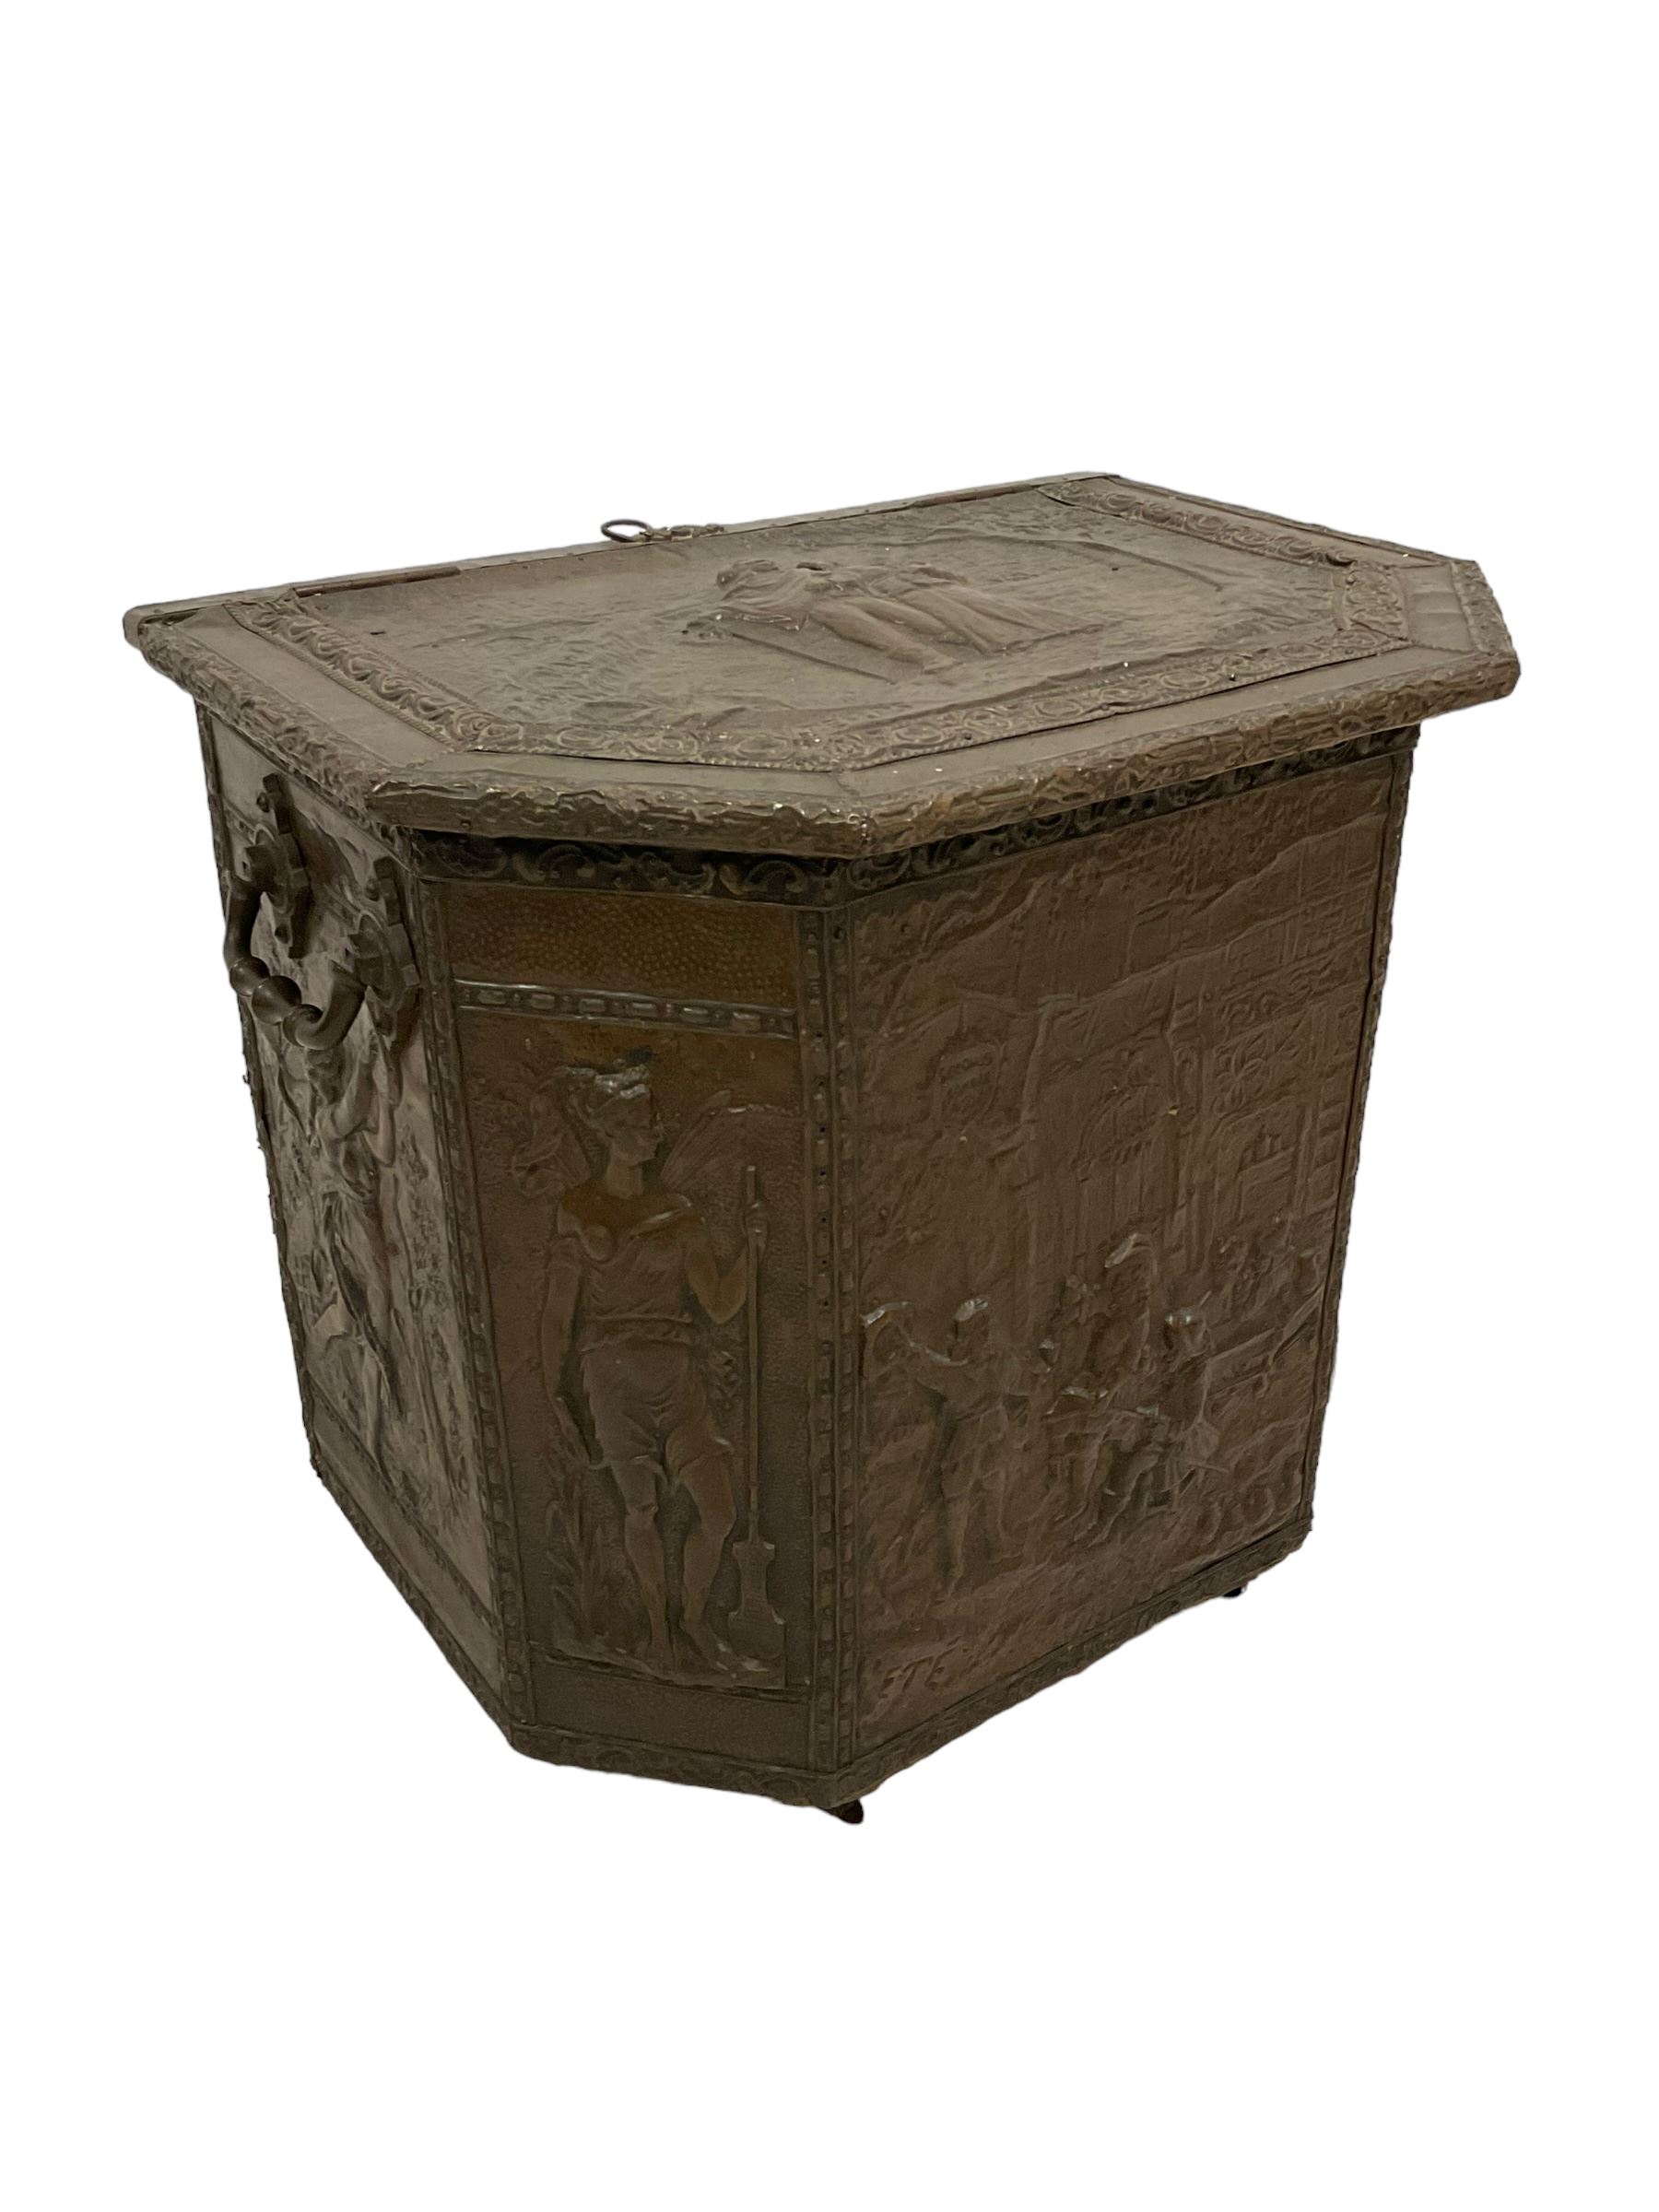 Large 19th century wooden and brass repousse coal box - Image 2 of 7